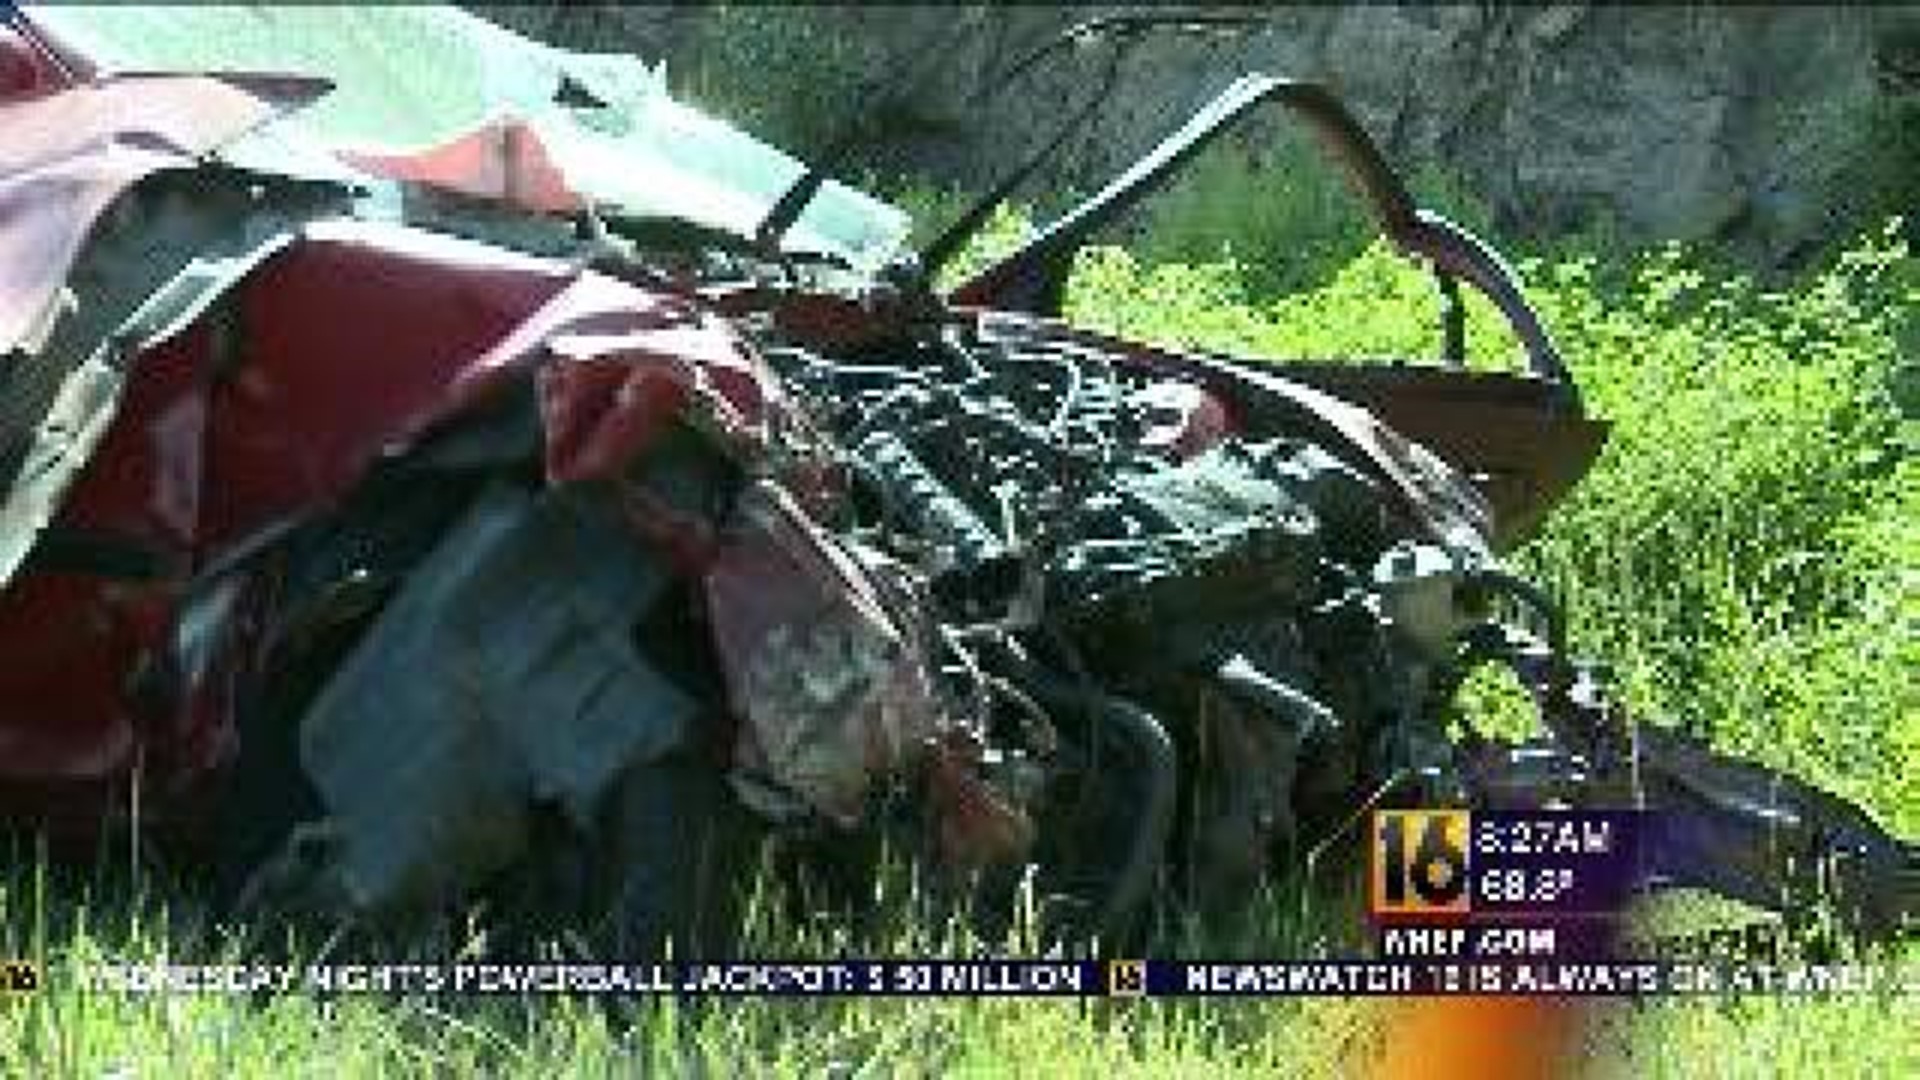 Man Killed in Wreck